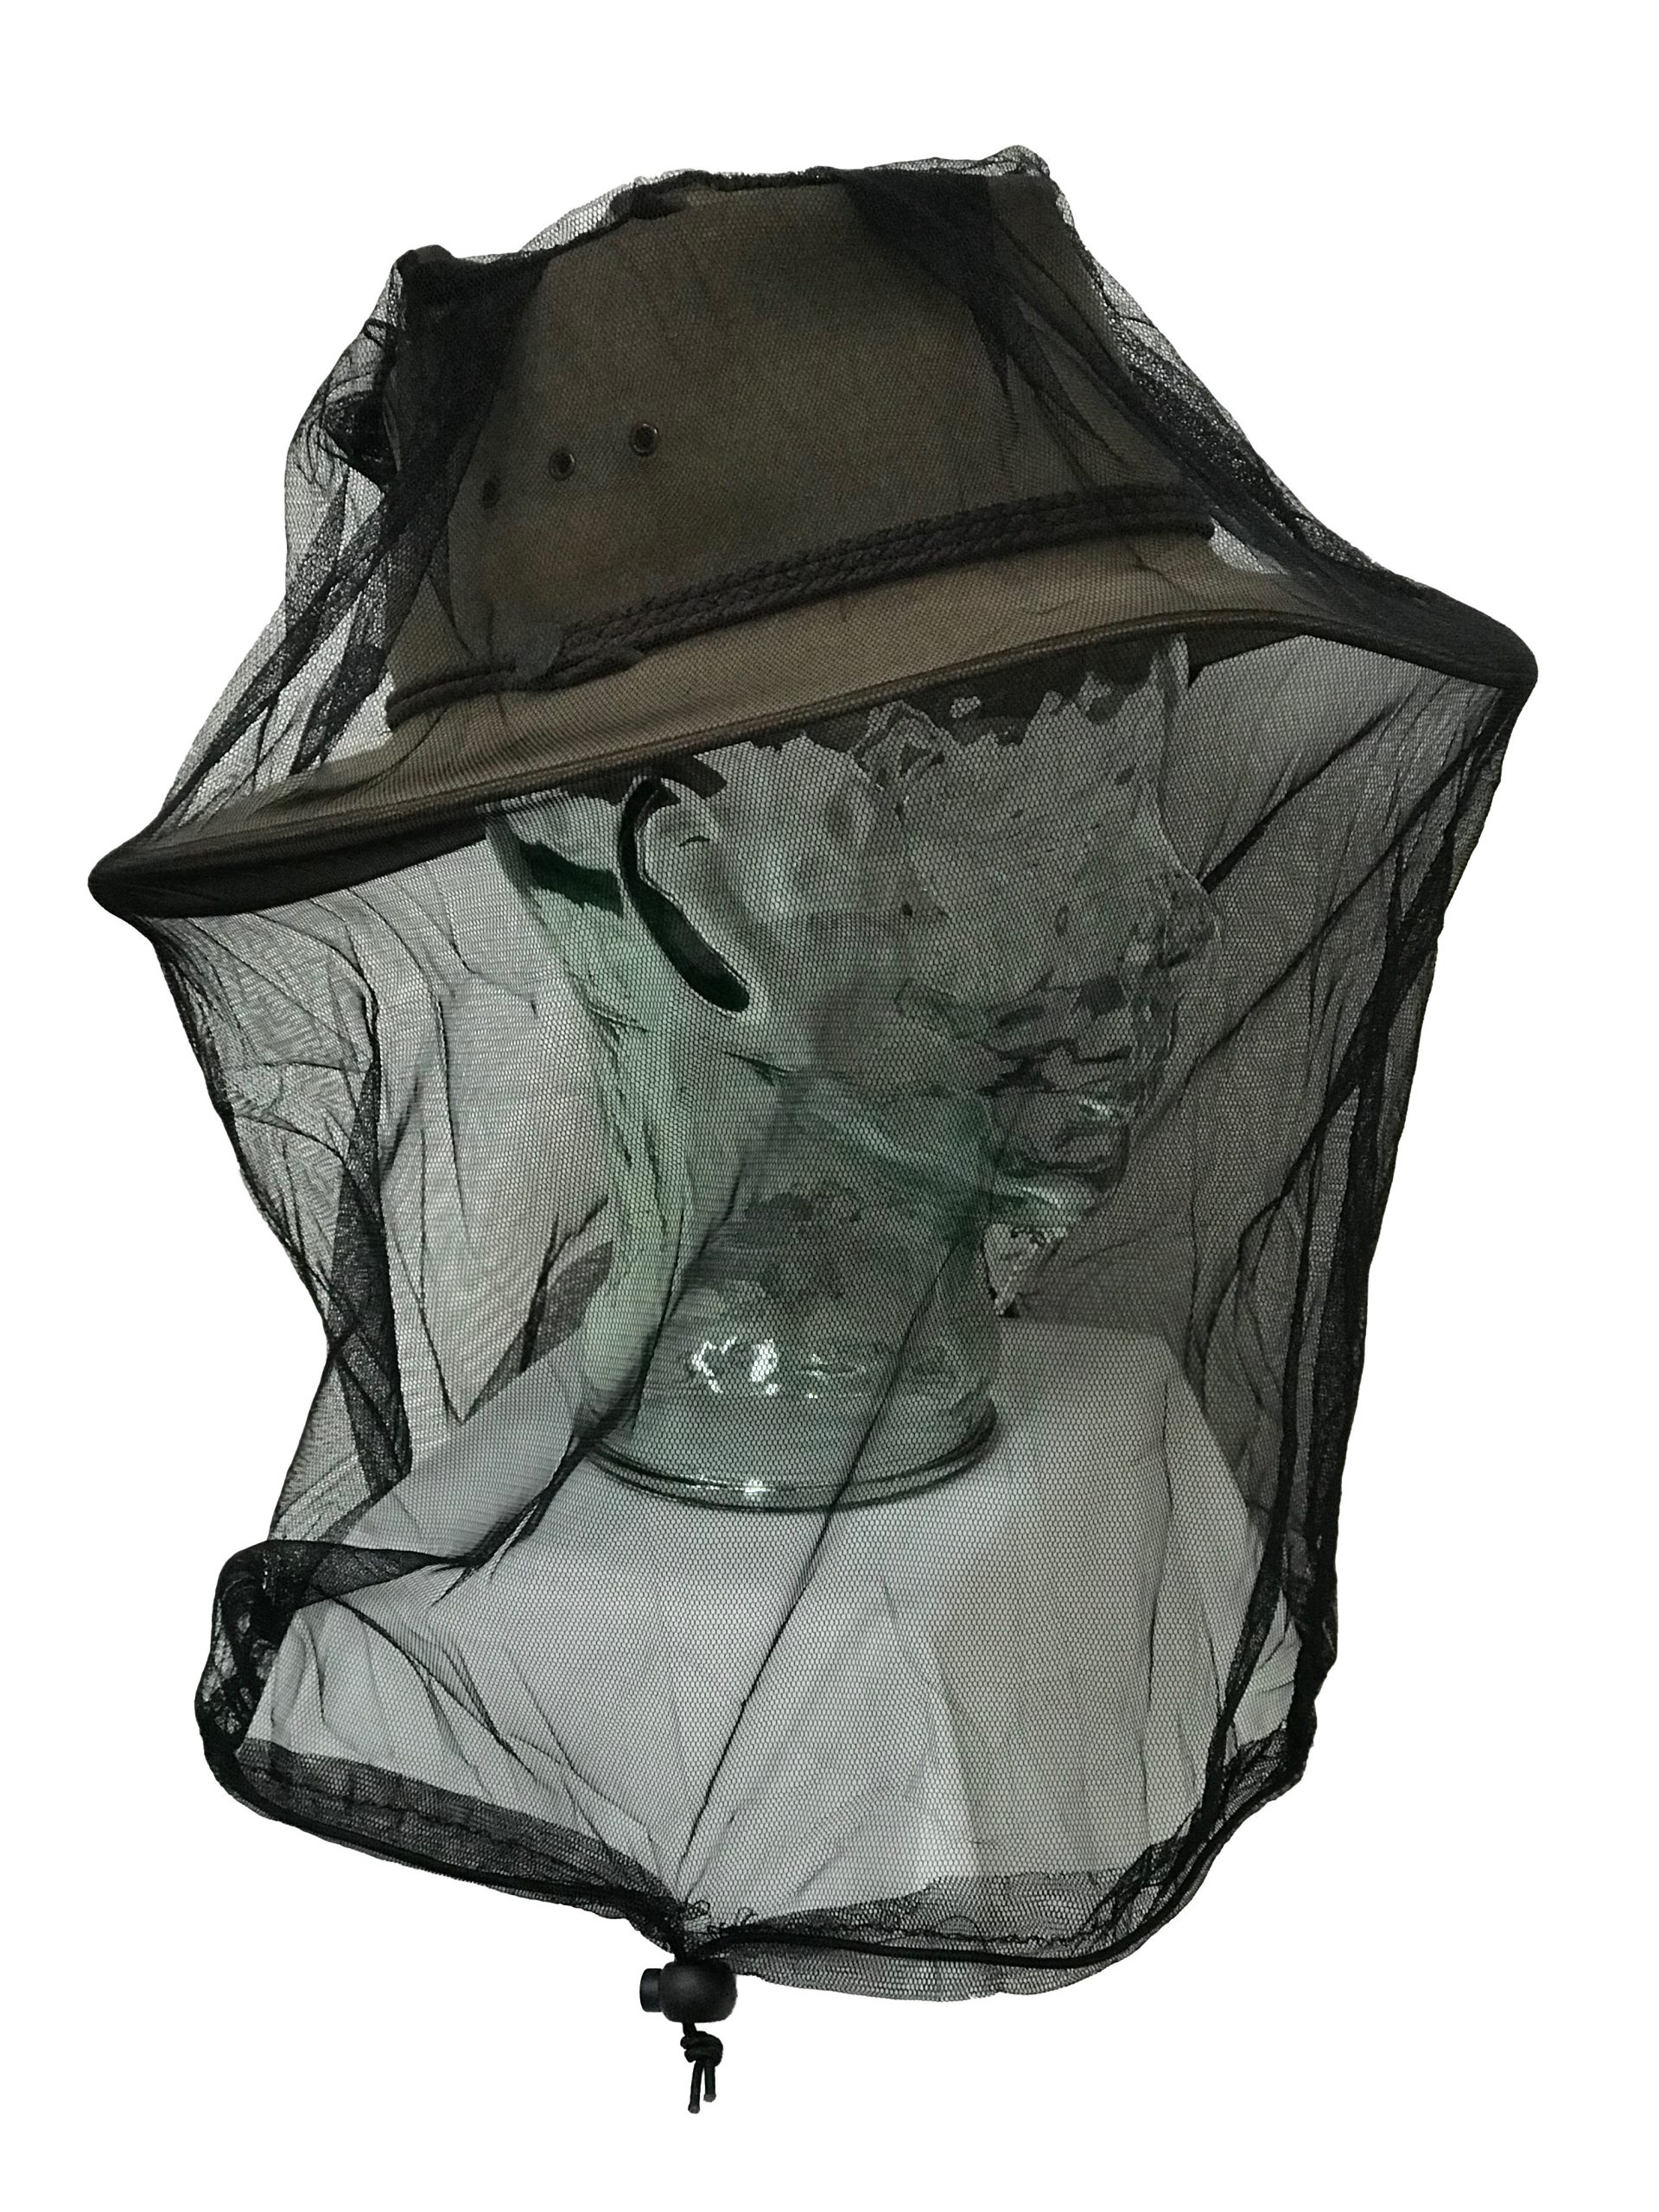 AOS Mosquito Mozzie Fly Insect Head Net XL Design No Holes 60cm